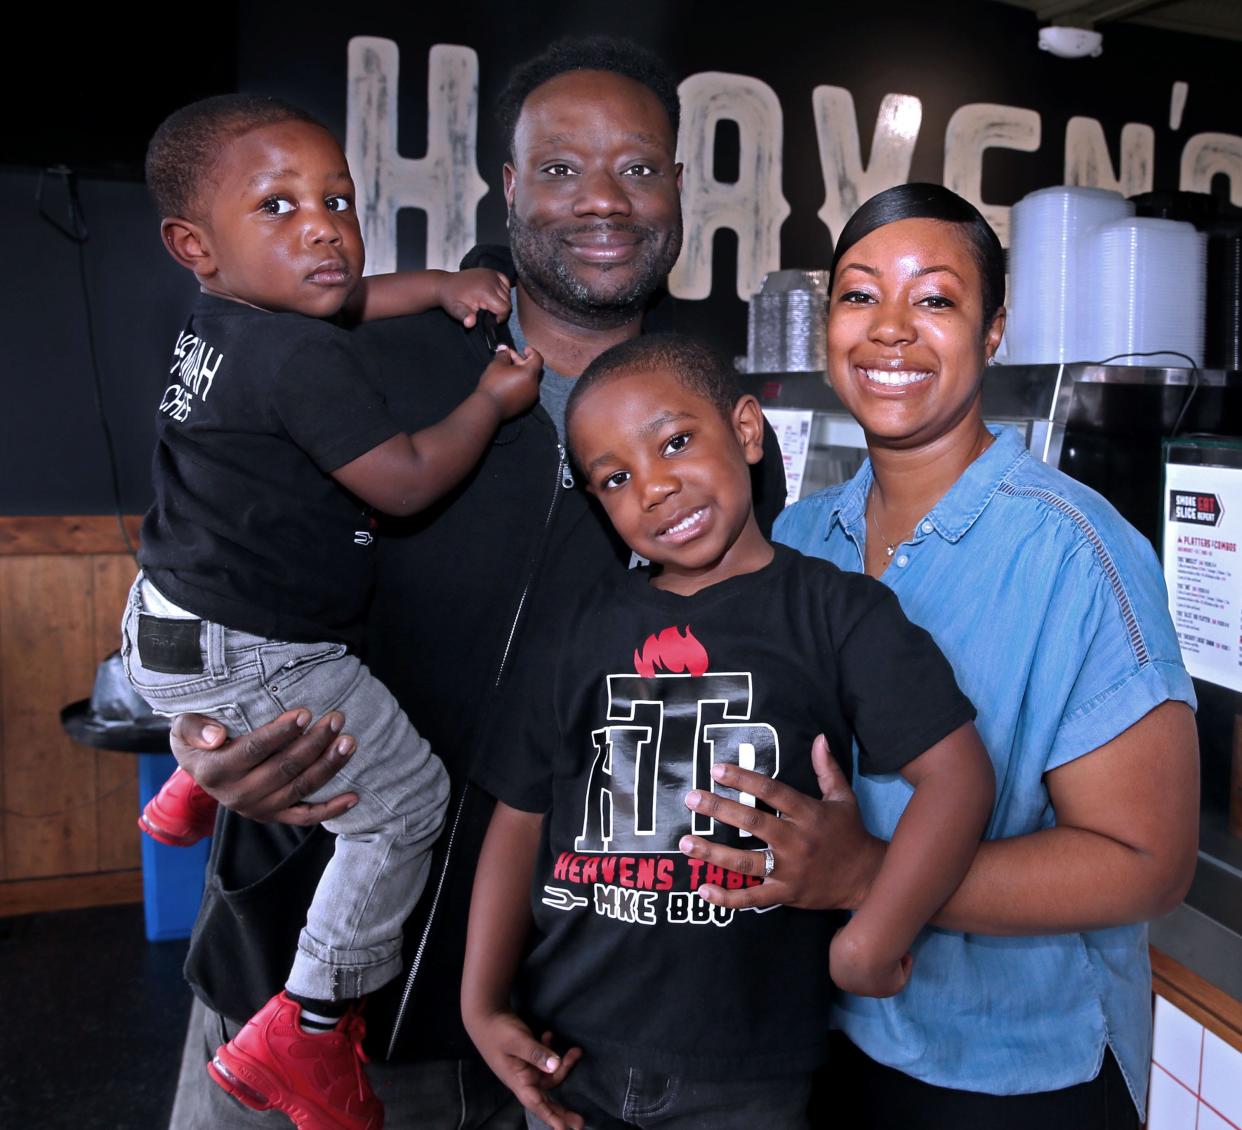 Heaven’s Table BBQ is closed on Sundays, but chef-owner Jason Alston still will be cooking on Father's Day. He'll cook for his family: sons Nehemiah, 2, whom he's holding, and Noah, 4, and his wife, Karesha.